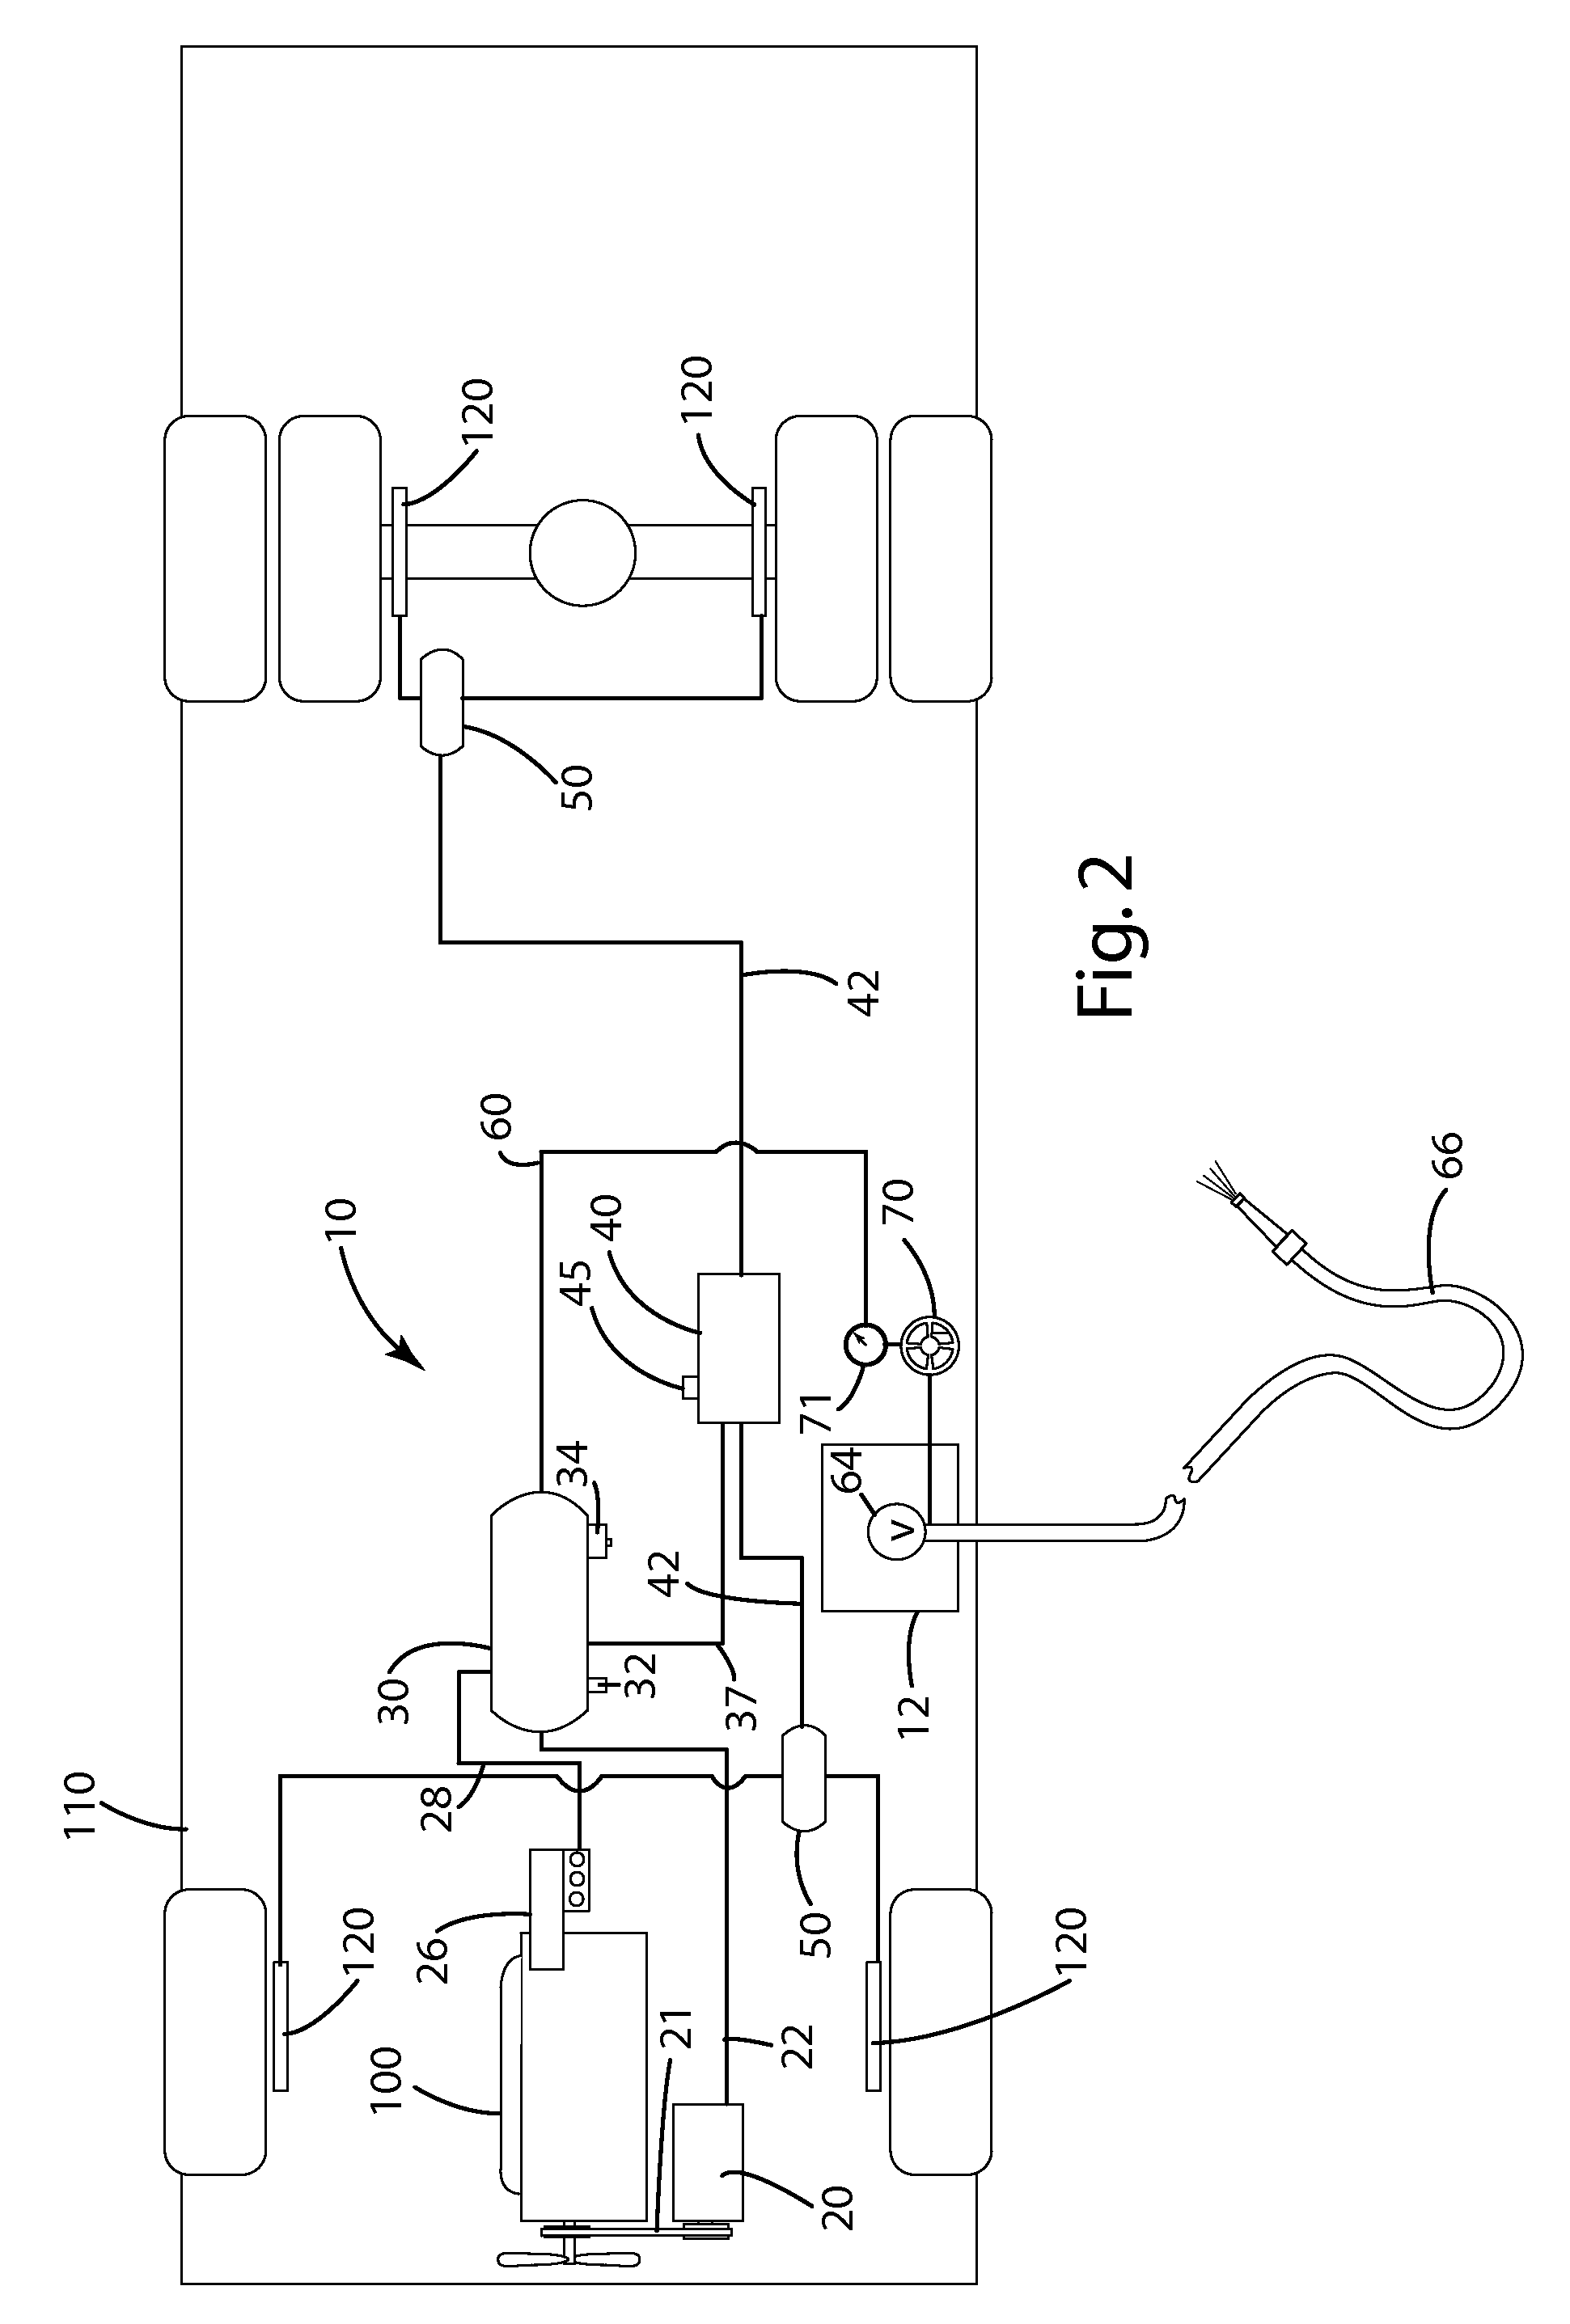 Compressed fluid system and related method